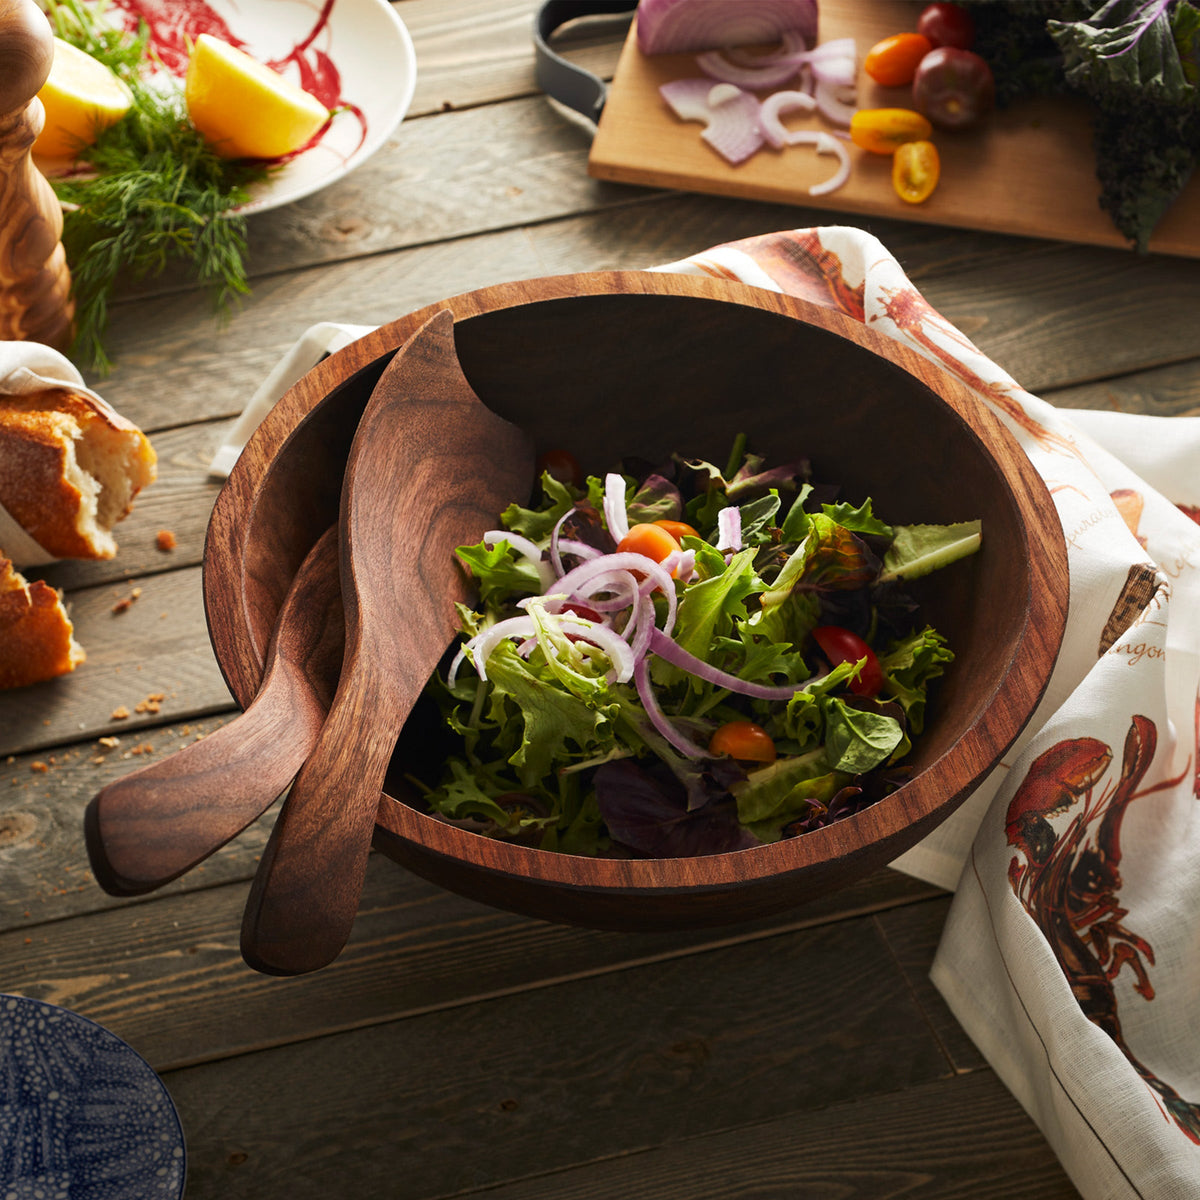 A Peterman&#39;s black walnut wooden bowl with a salad in it.